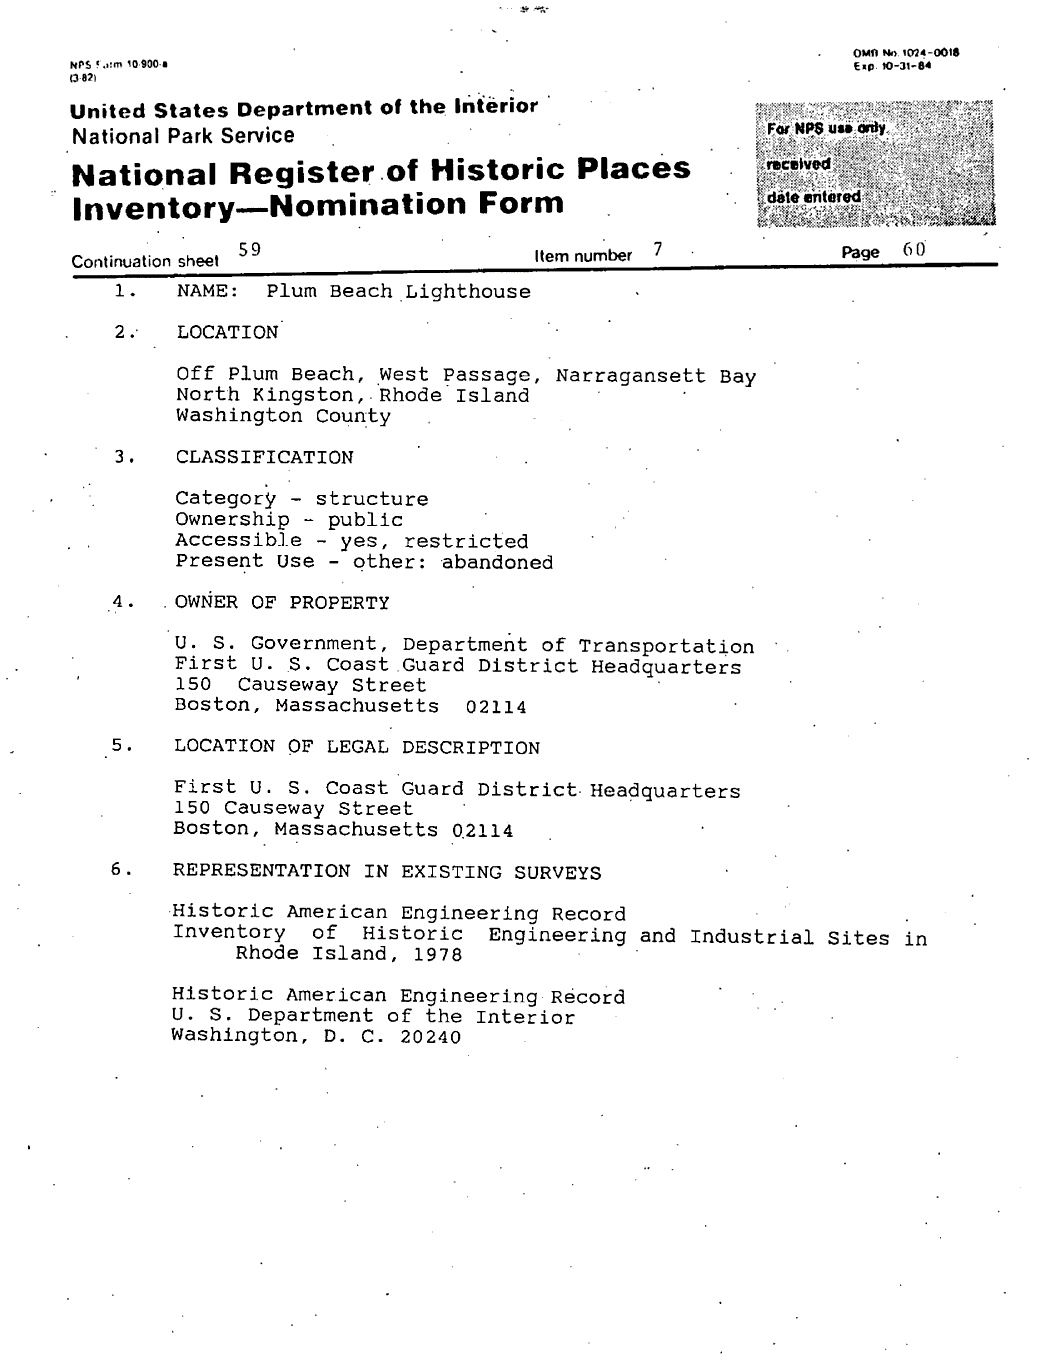 National Register of Historic Places Inventory Nomination Form - page 1